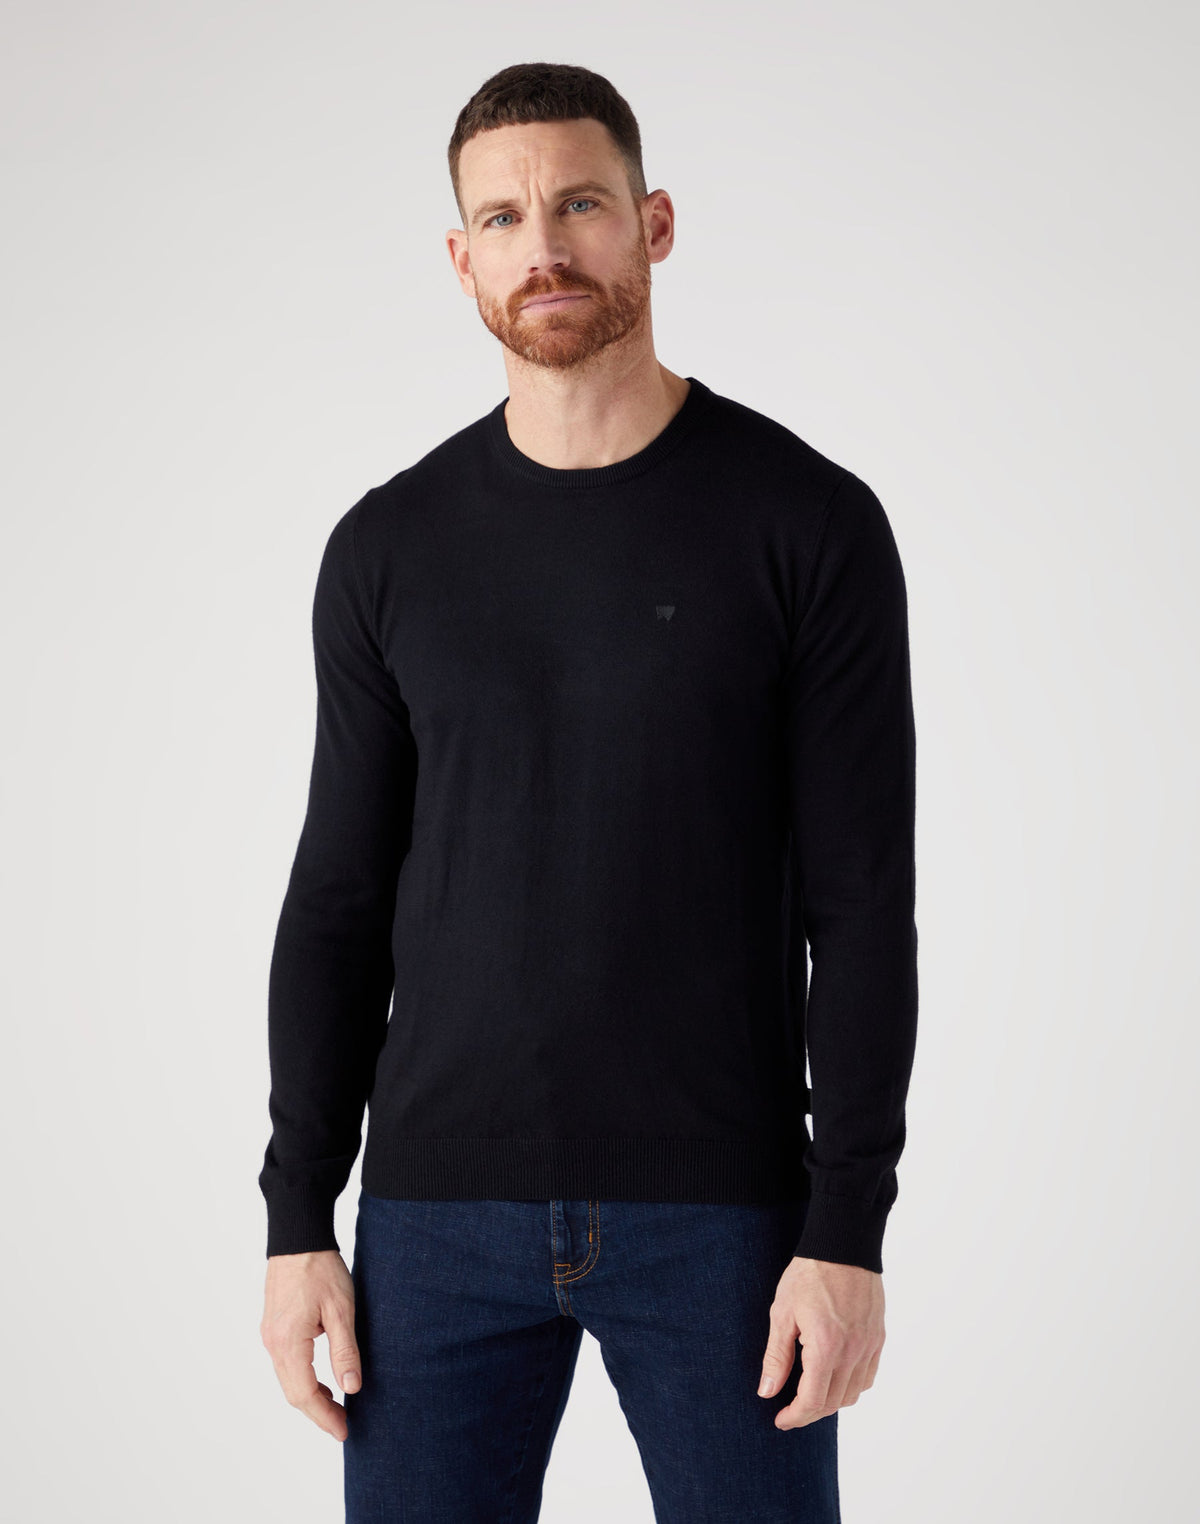 Crewneck Knit in Real Black